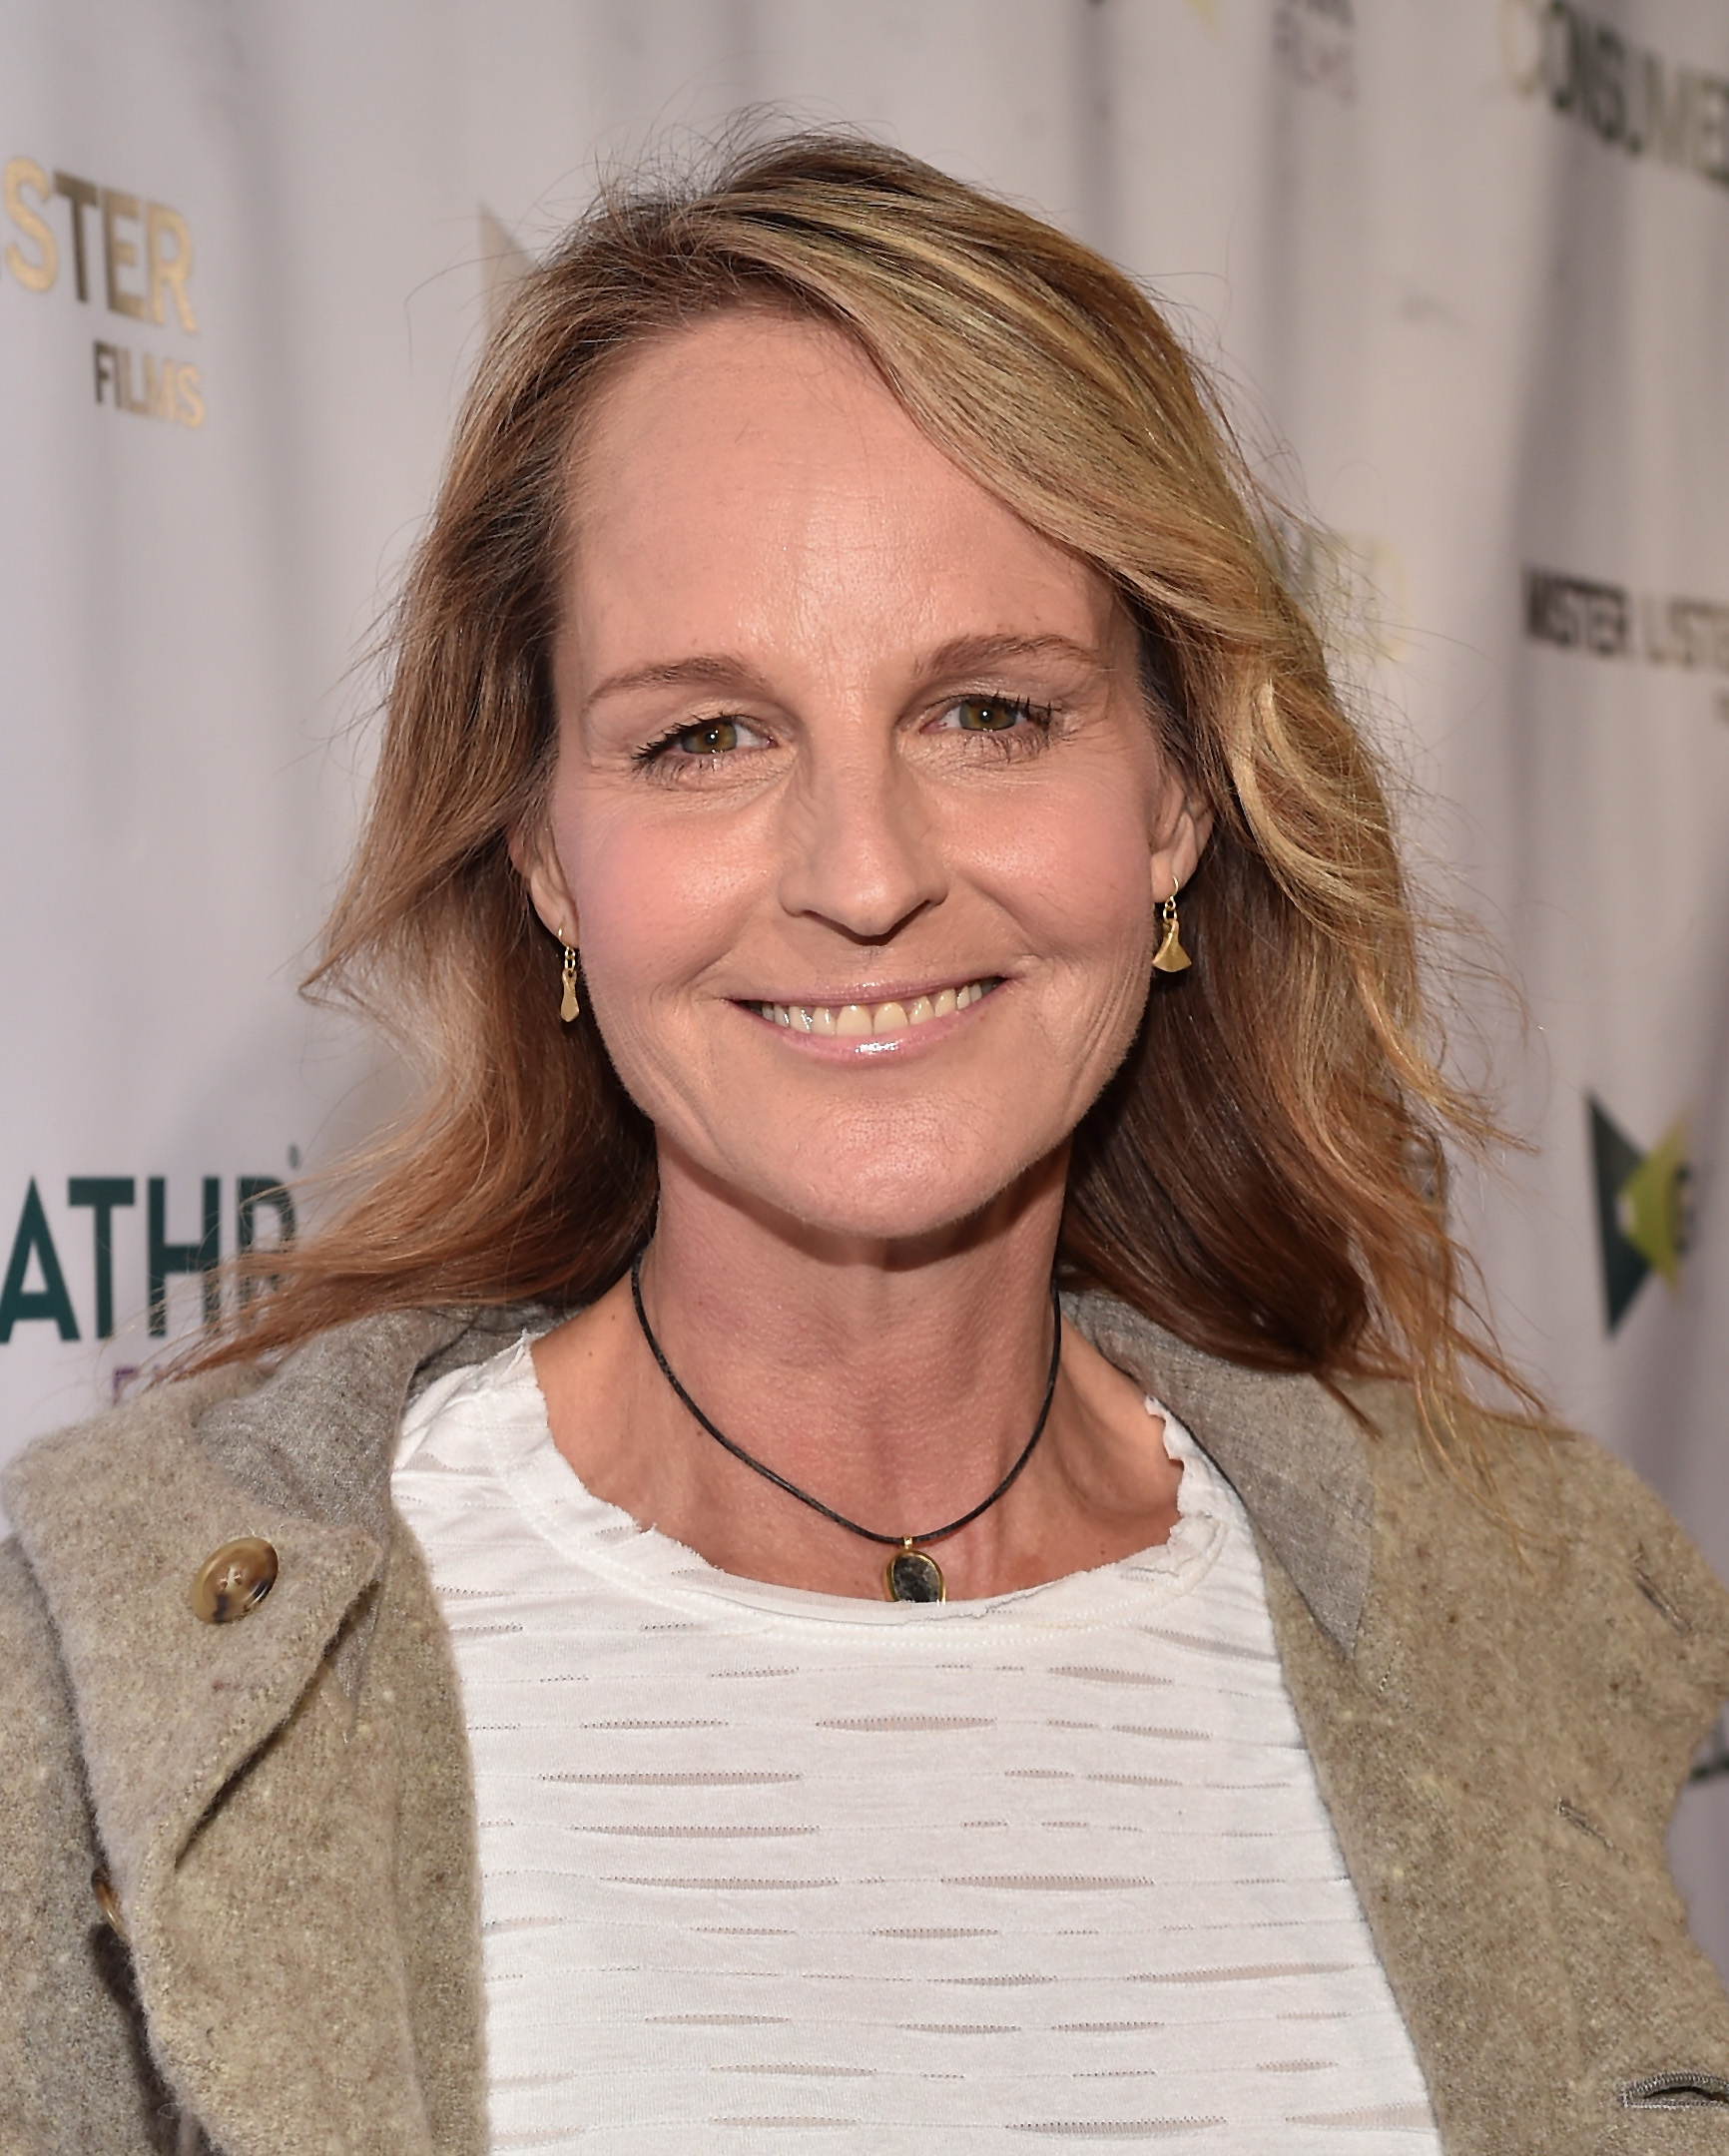 Helen Hunt attends the Los Angeles premiere of "Consumed," 2015 | Source: Getty Images